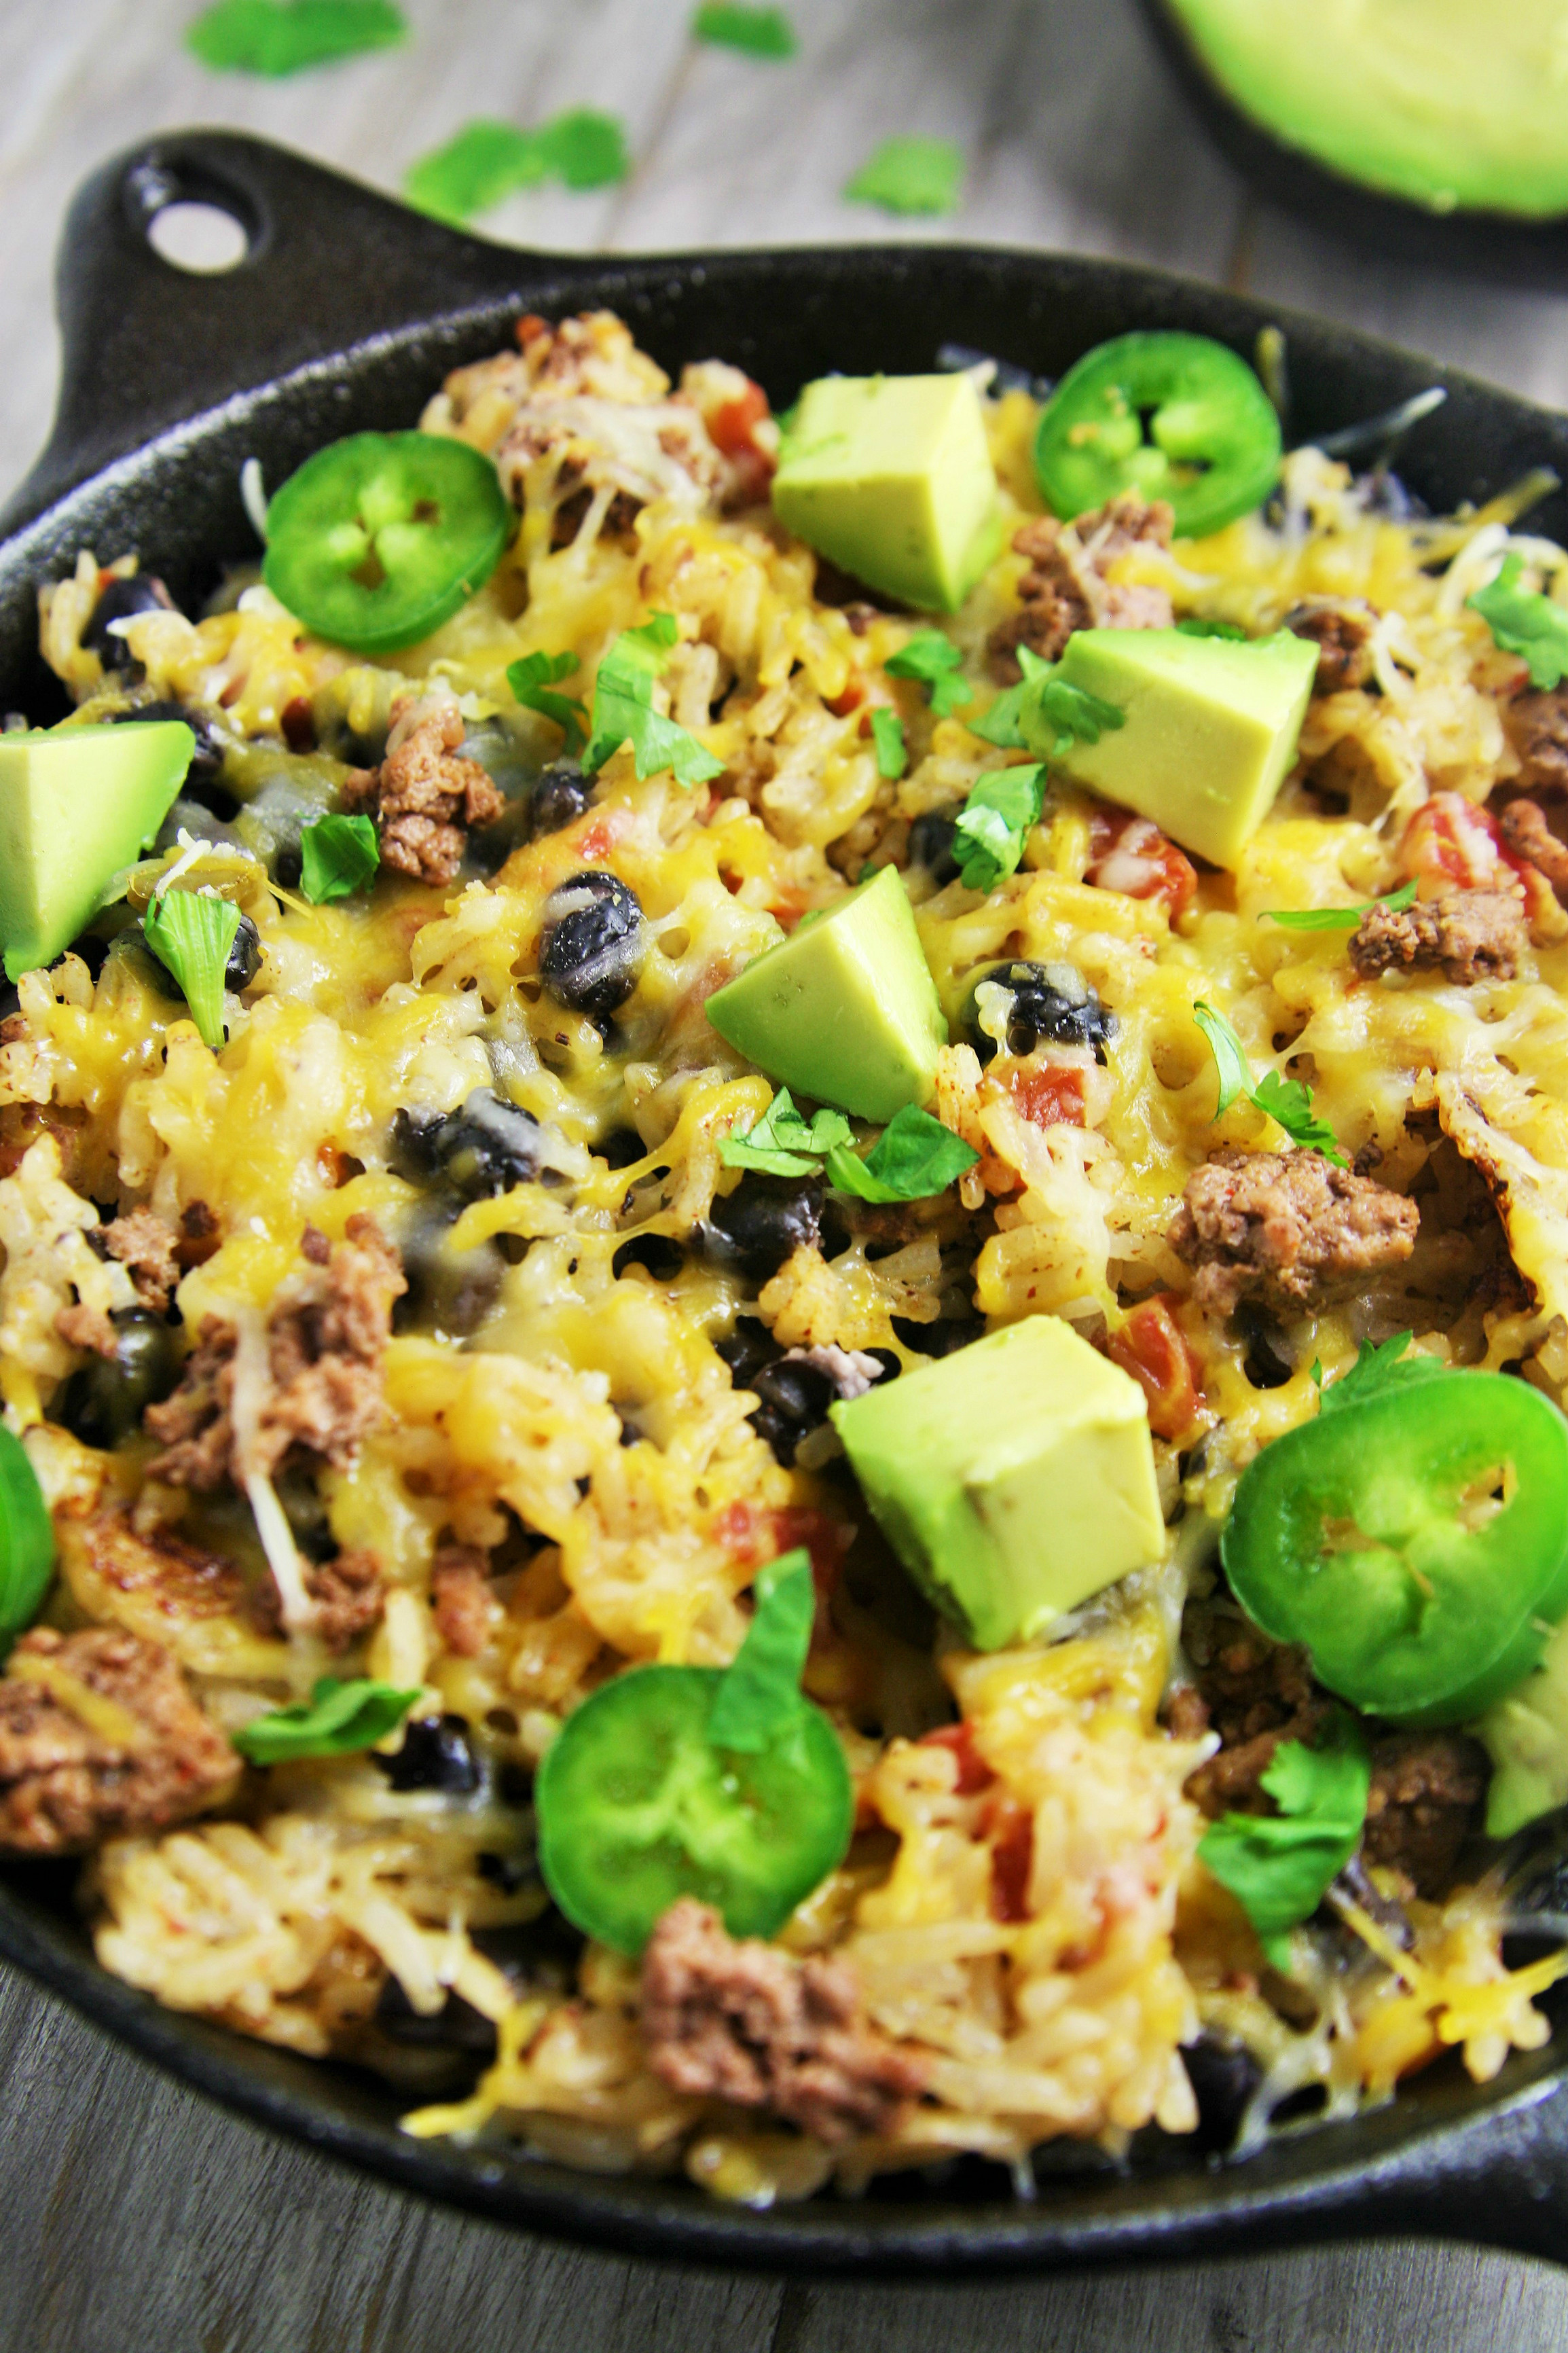 This easy, delicious rice skillet filled with burrito ingredients is sure to be a hit at your next fiesta or weeknight dinner.